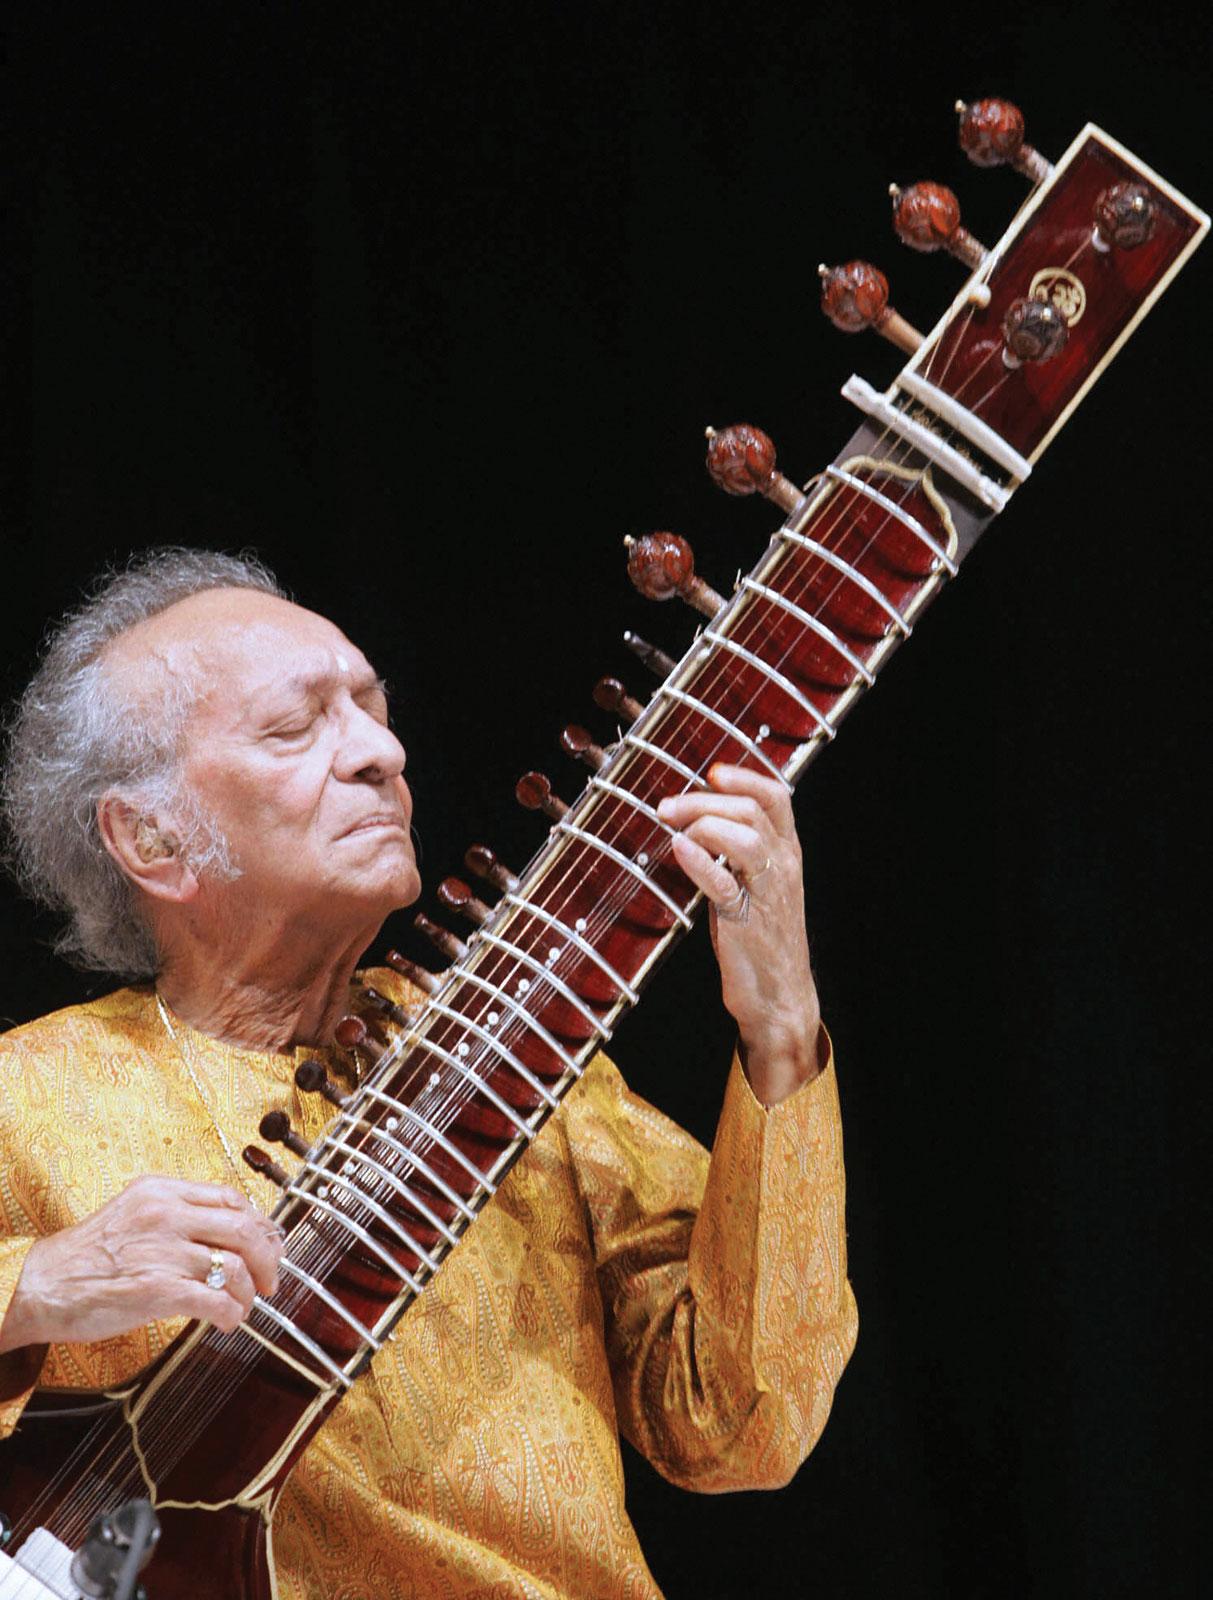 SITARS, RAGAS AND INDIAN CLASSICAL MUSIC: Some Wallpaper